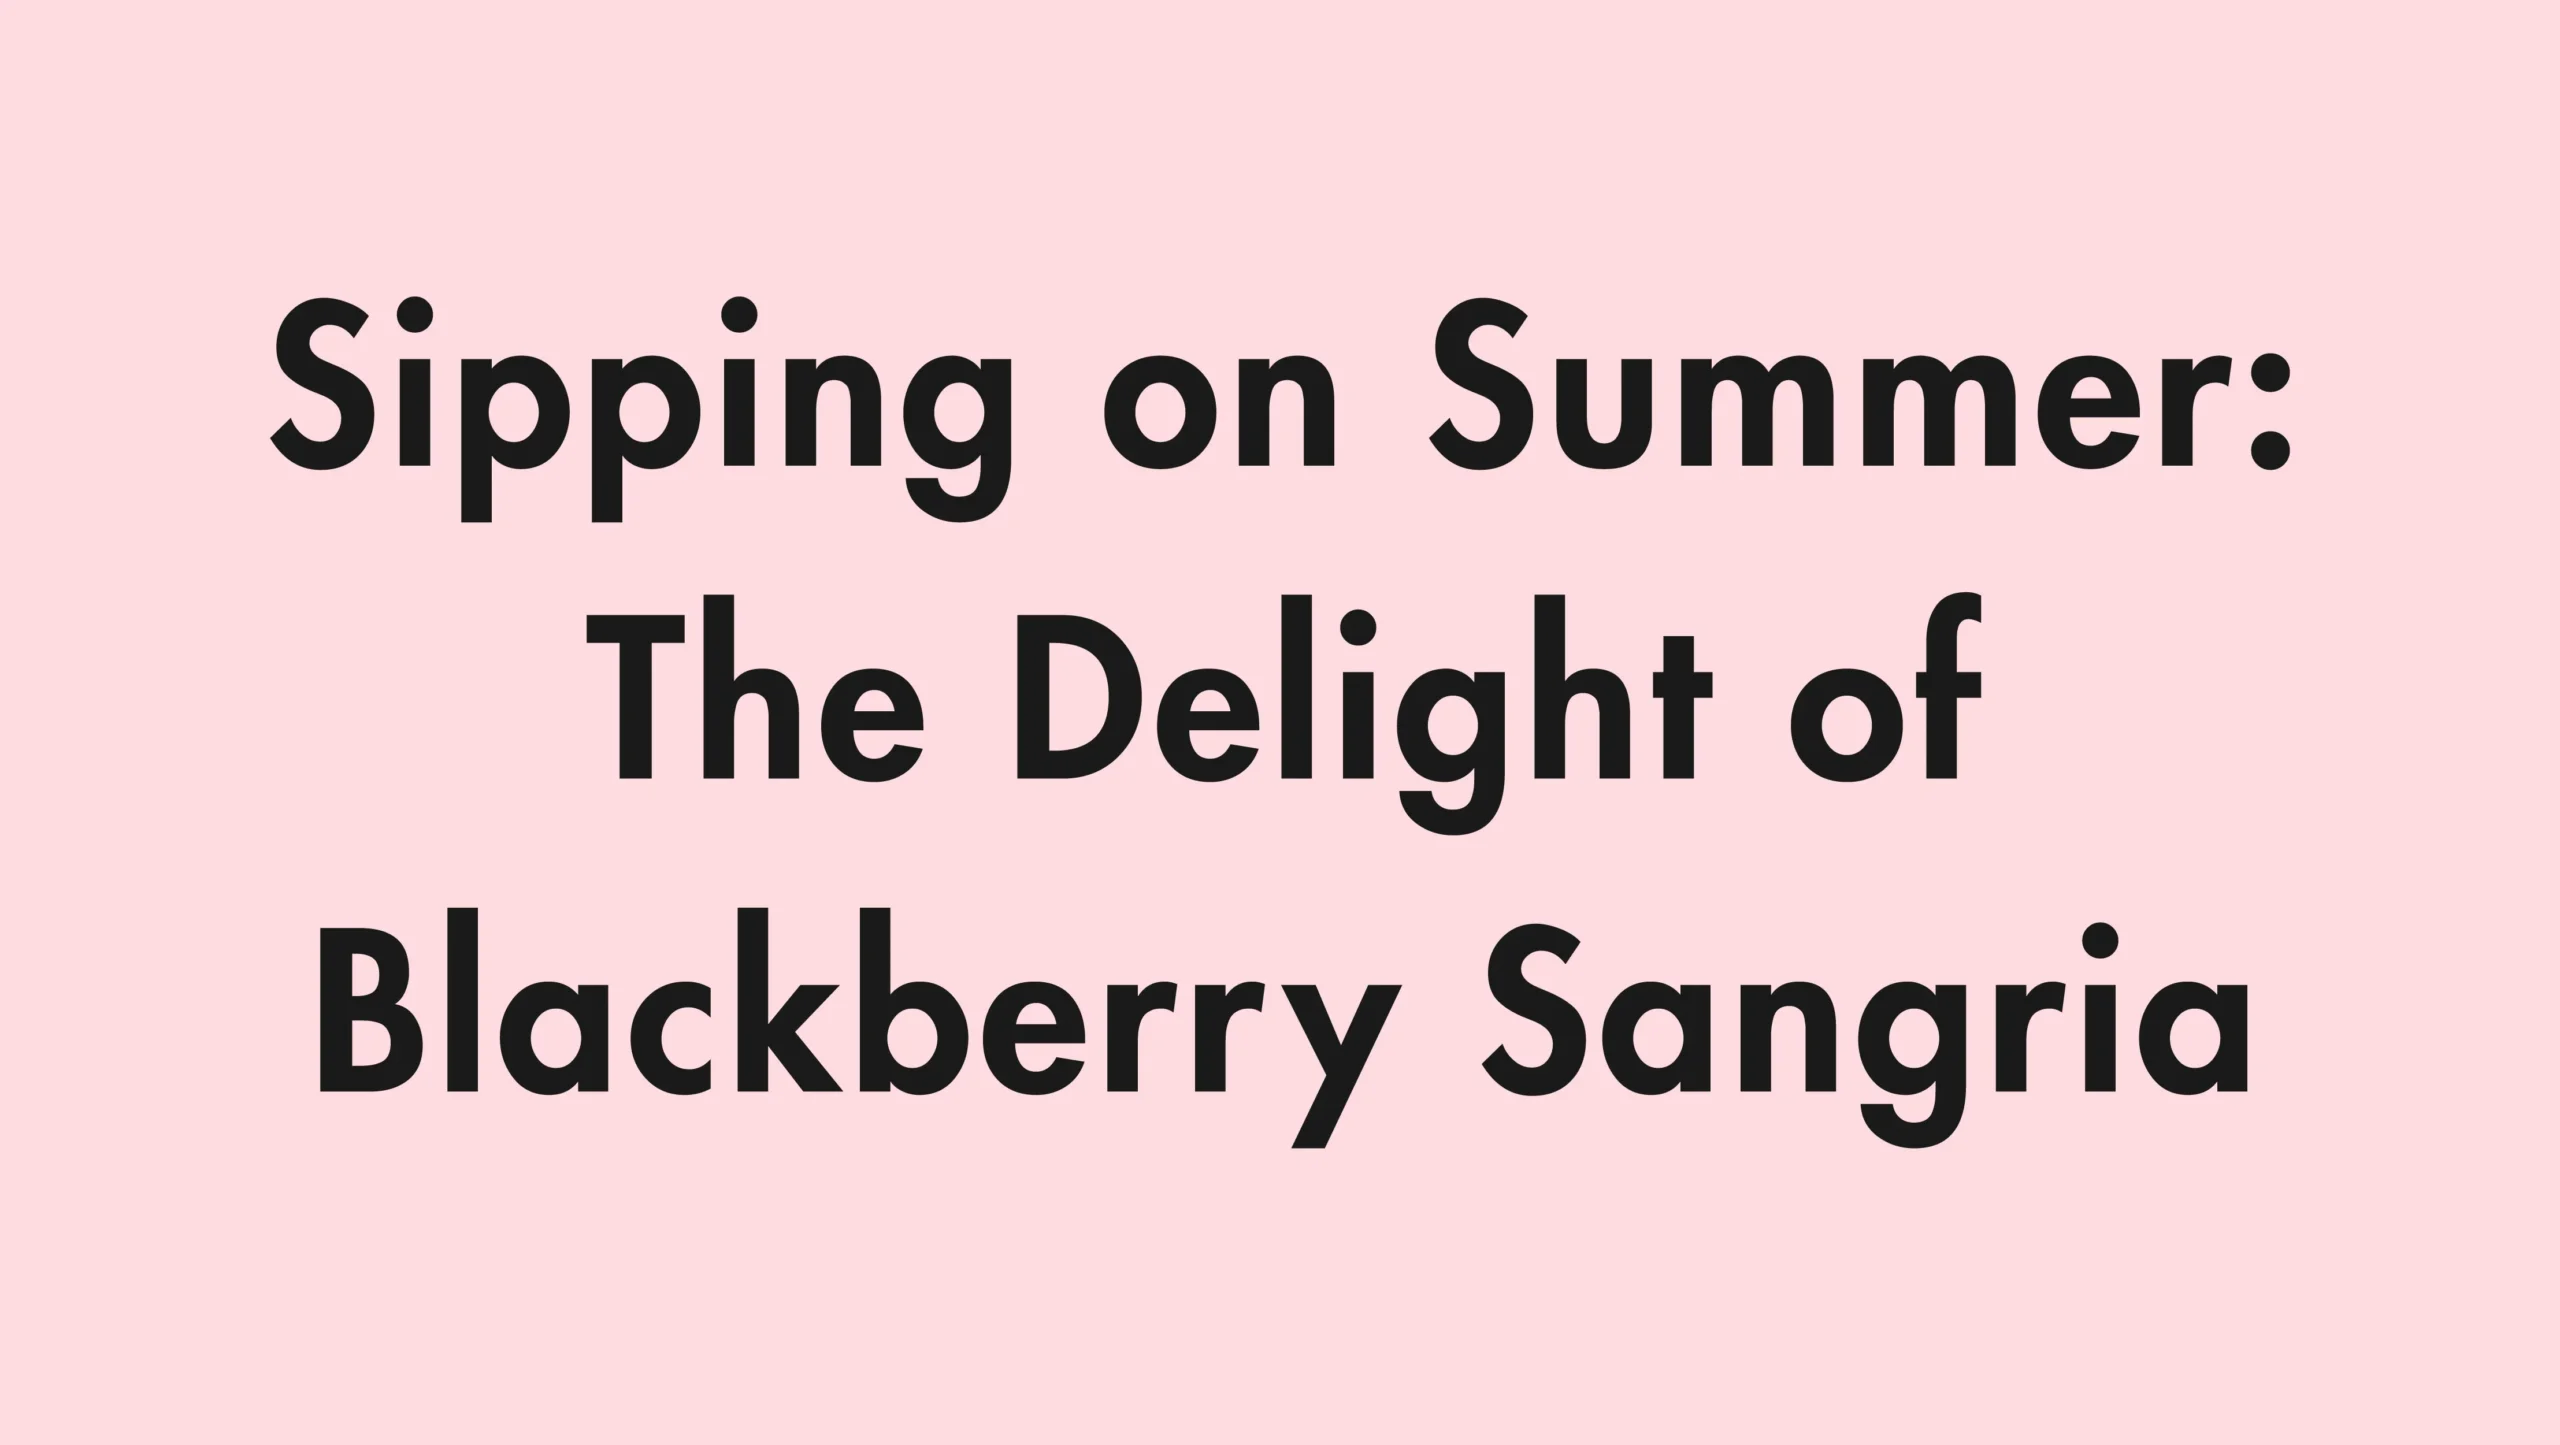 Sipping on Summer: The Delight of Blackberry Sangria